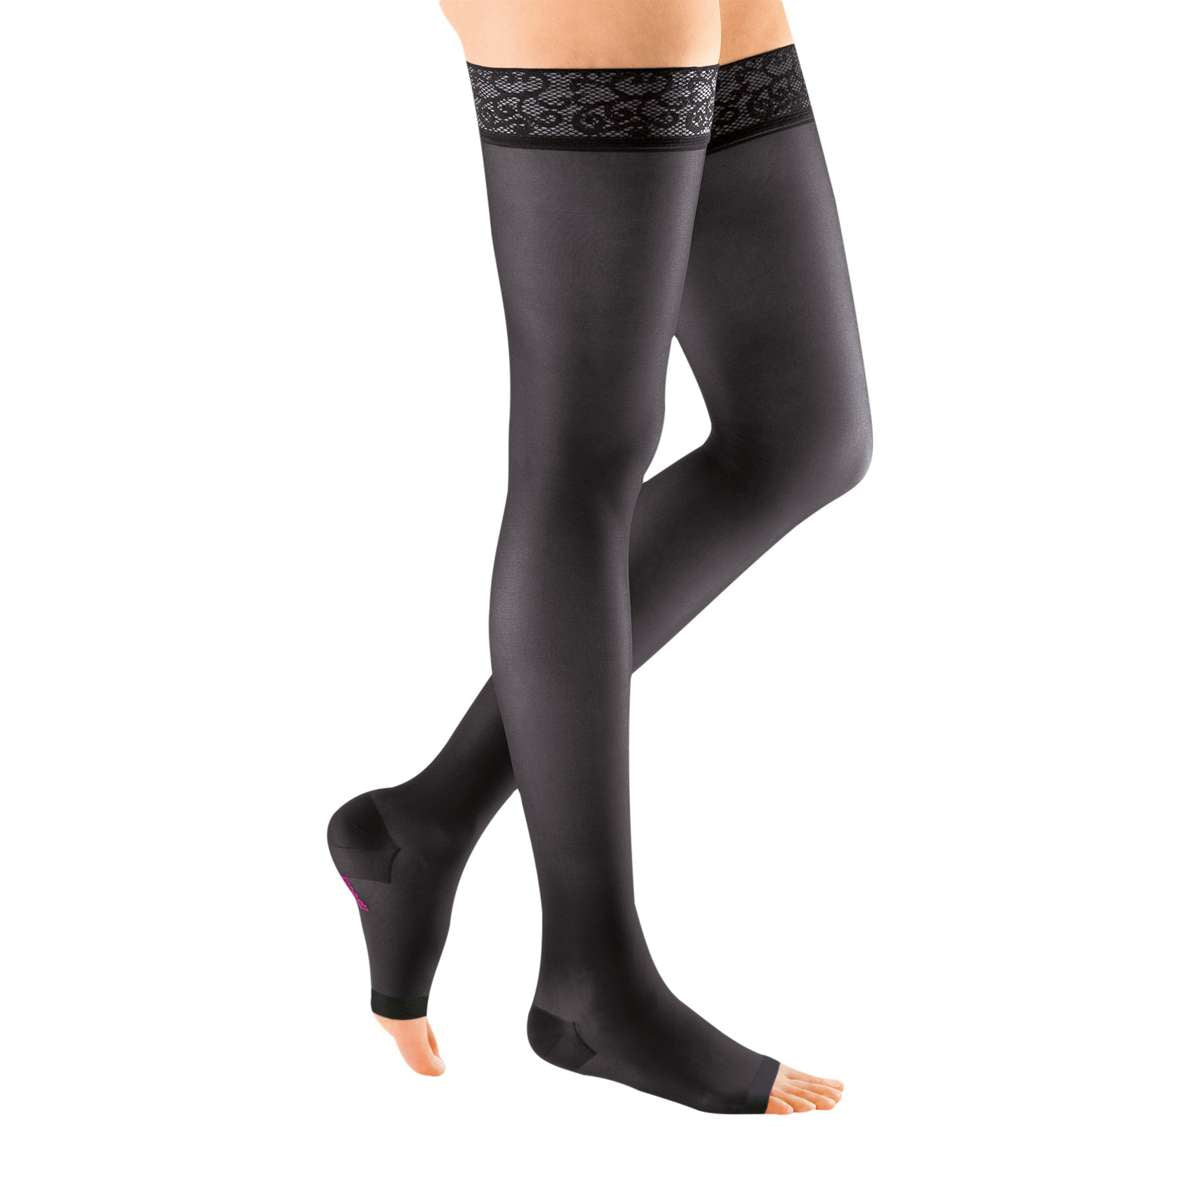 mediven sheer &amp; soft 30-40 mmHg thigh lace topband open toe standard